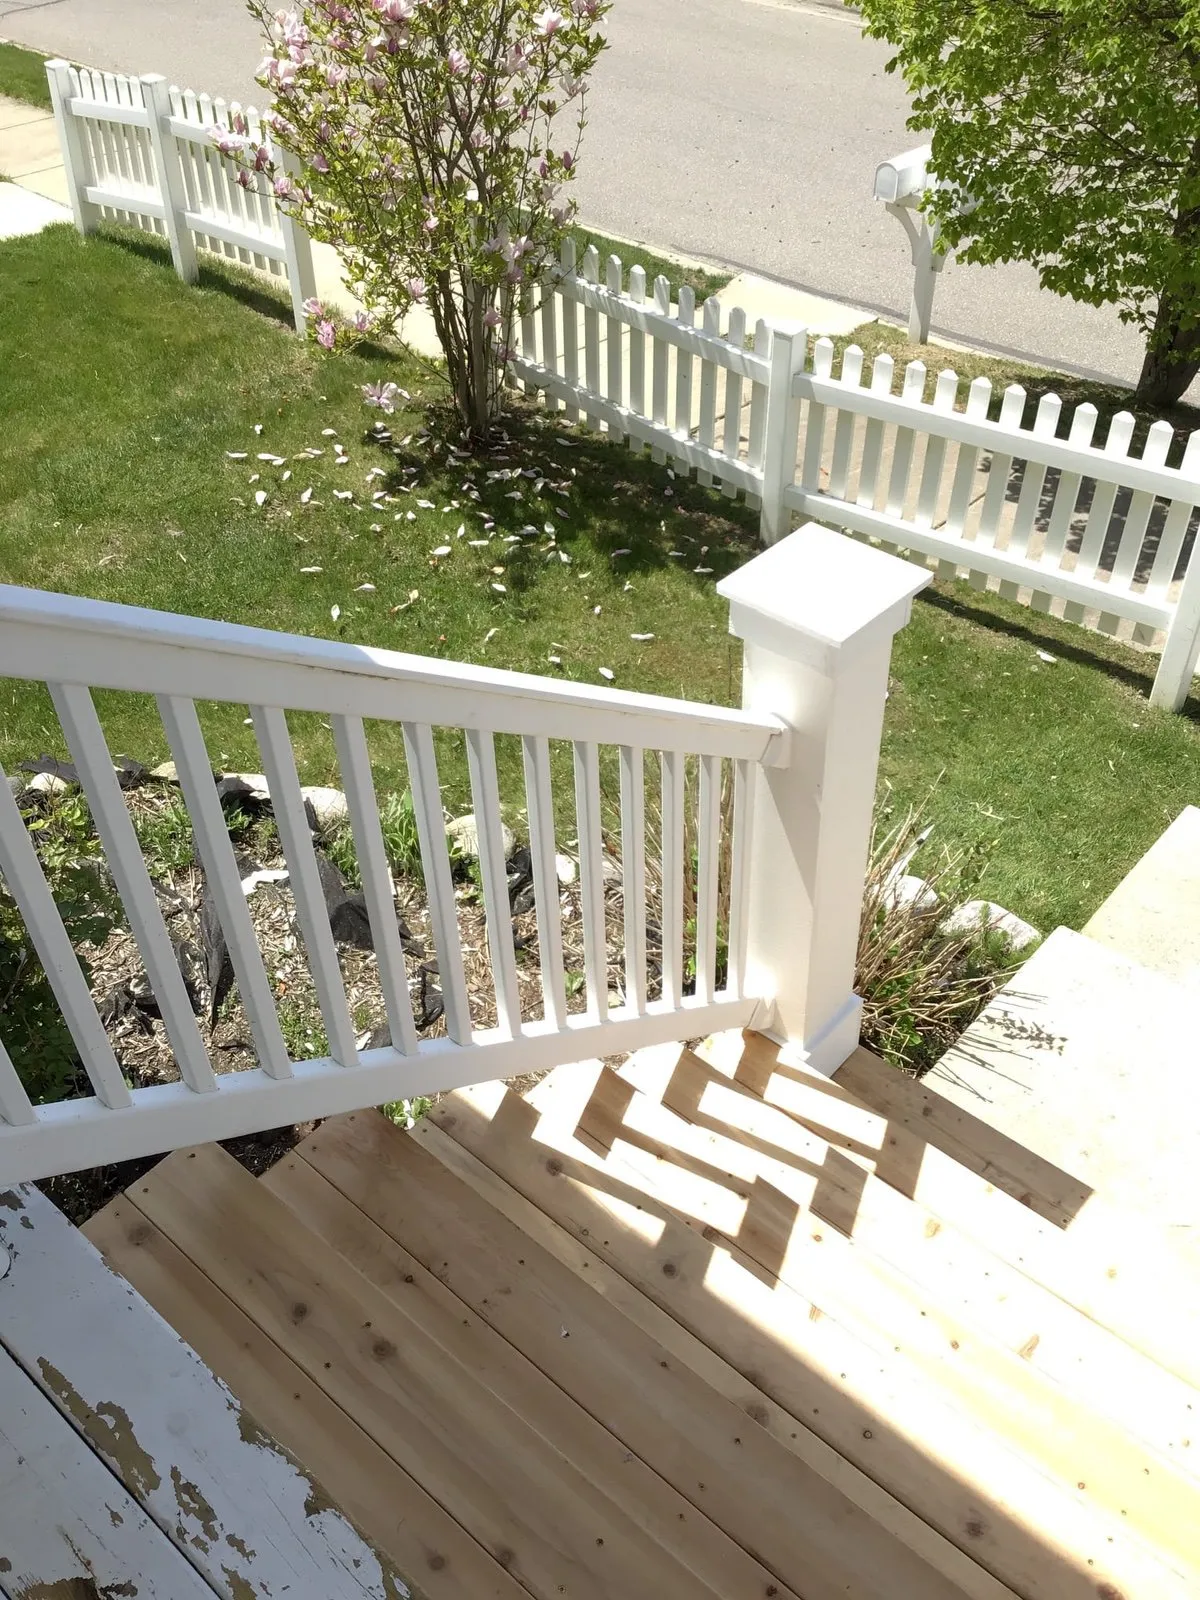 Wood rot repair in Ann Arbor MI on exterior stair post completed by MyHandyman.